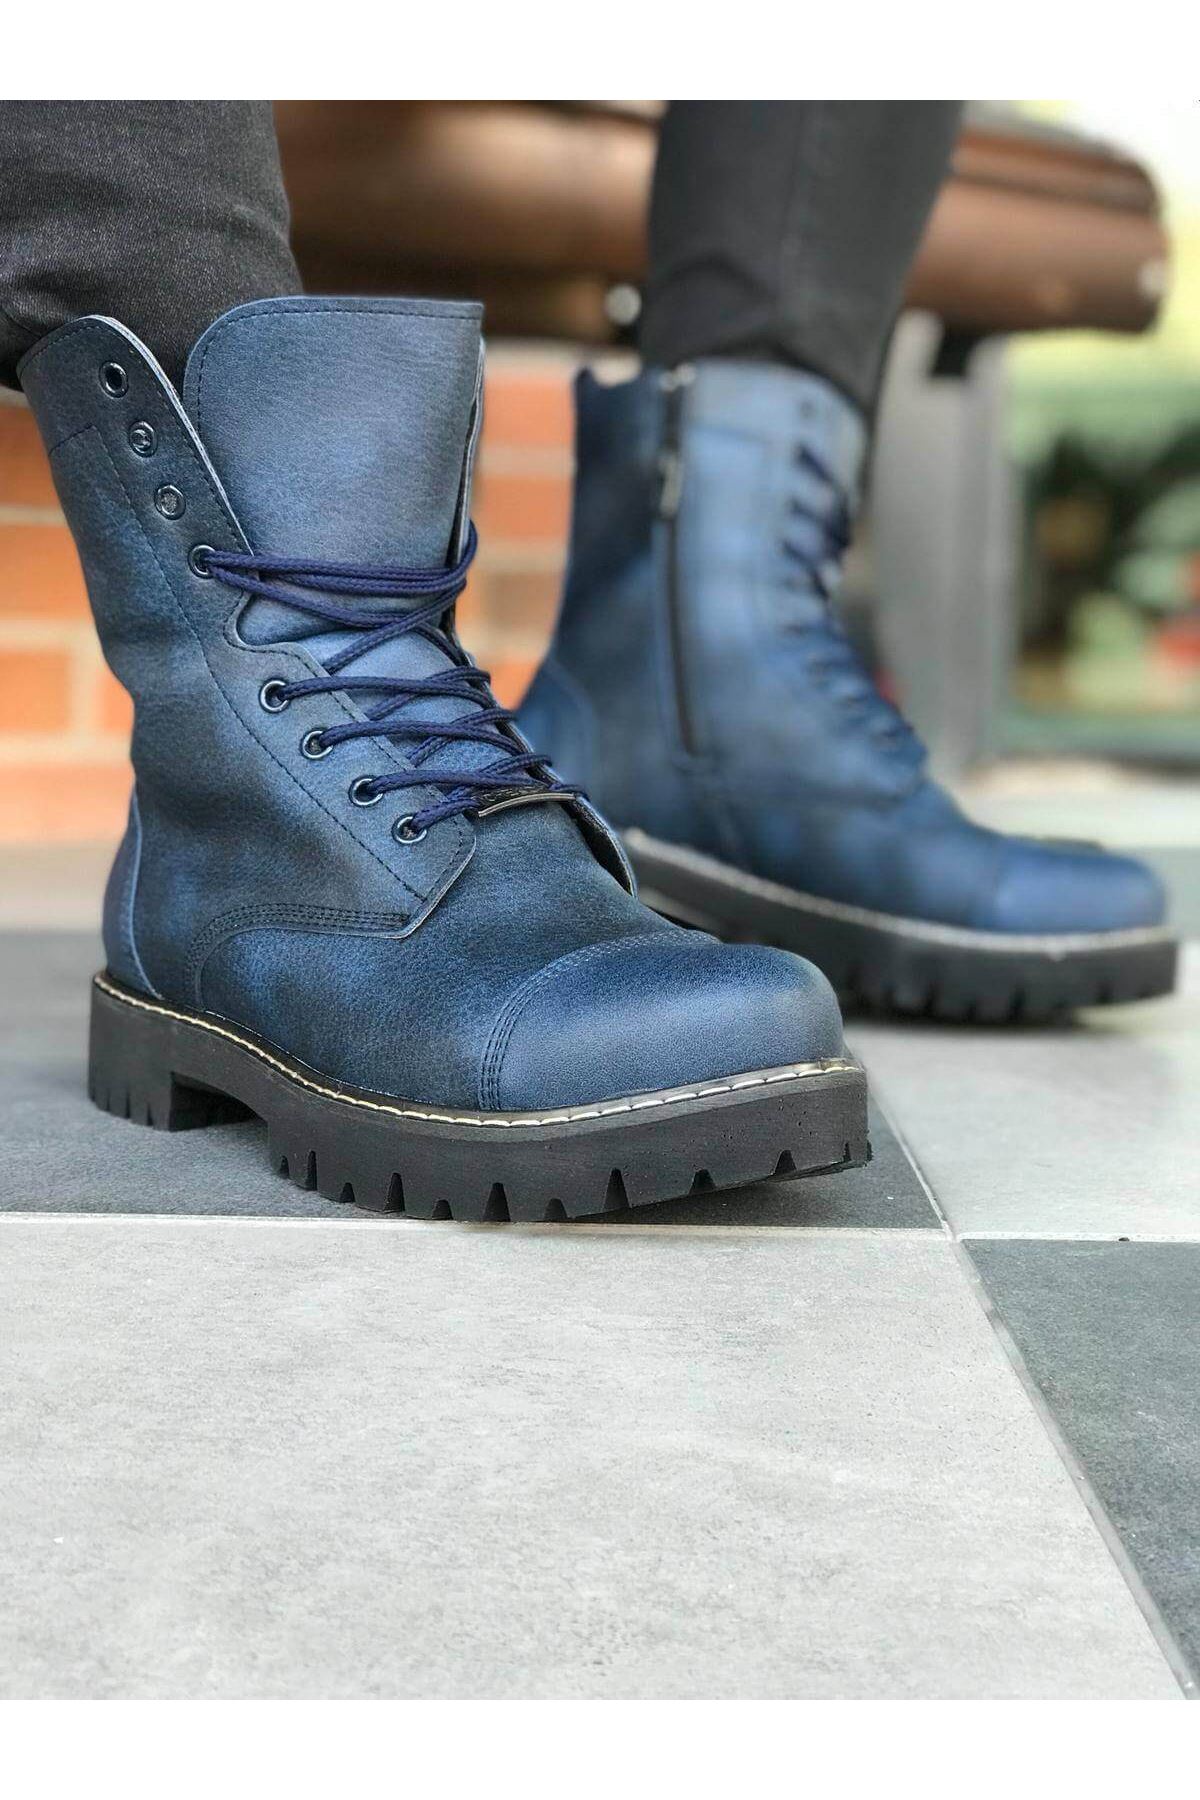 Chekich 2021 Boots for Men Navy Blue Faux Leather Laced and Zipper Winter Fashion Snow Big Sizes Ankle Sport Comfortable Warm Design Shoes Breathable Footwear Different Color Options CH009 V4